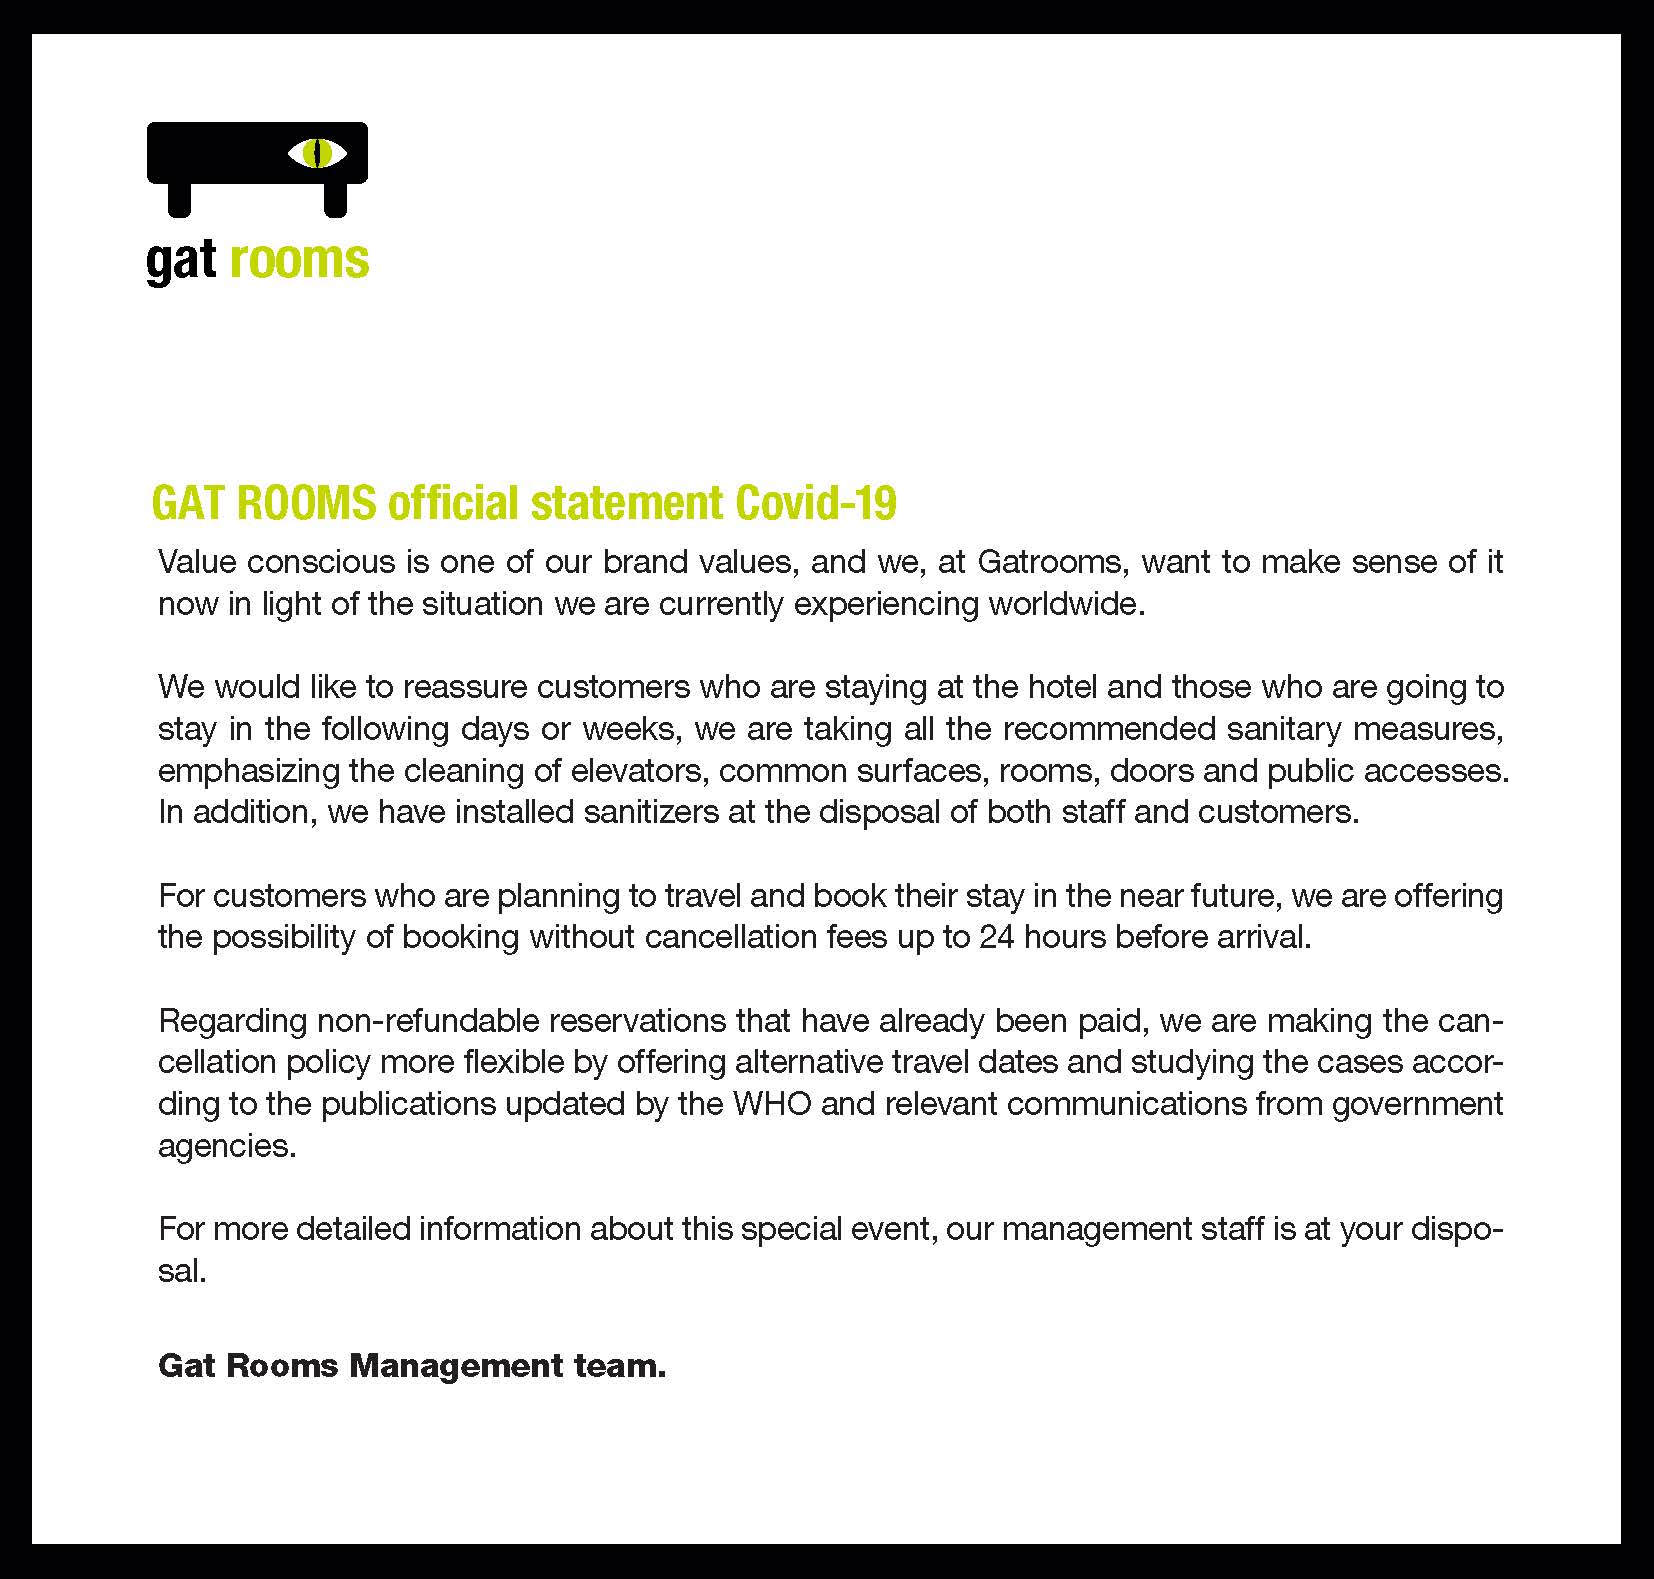 Gat rooms oficial statement Covid -19